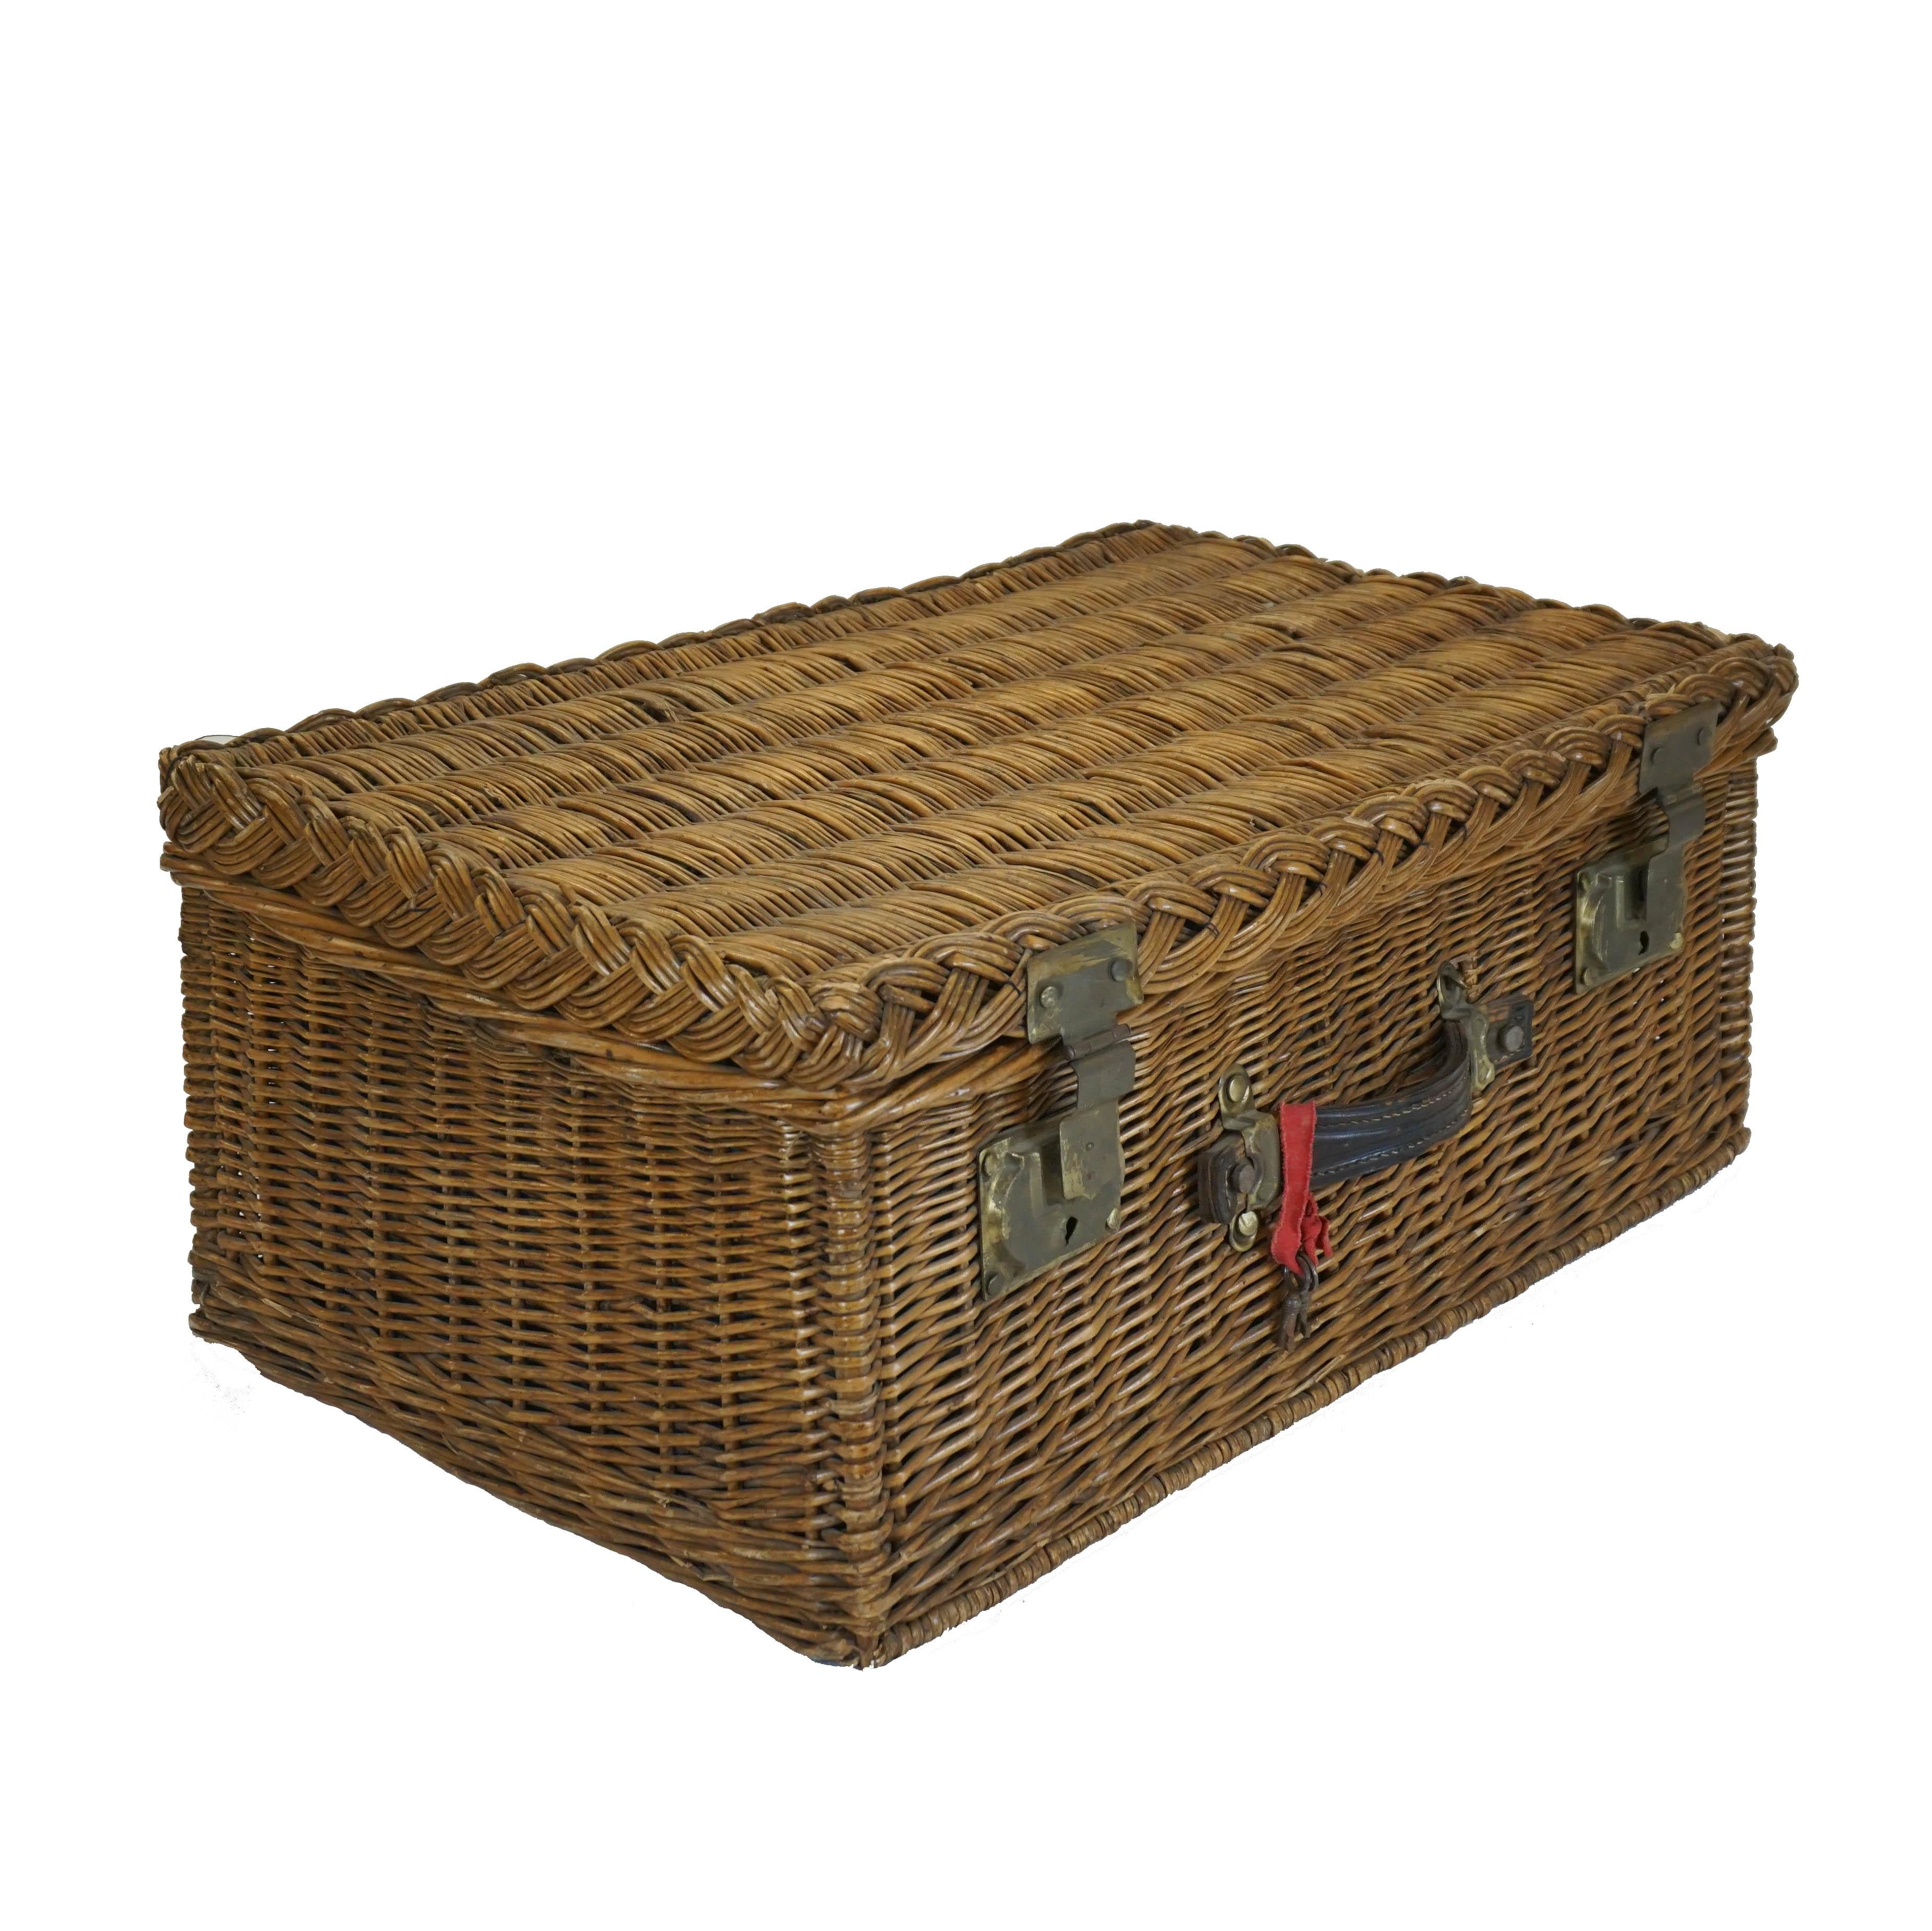 Vintage traditional woven wicker case in a classic pattern, charmingly lined with blue and white gingham fabric. This basket was made by an unknown manufacturer in France, circa 1960s. Finely crafted with a chunky leather handle and metal hardware,